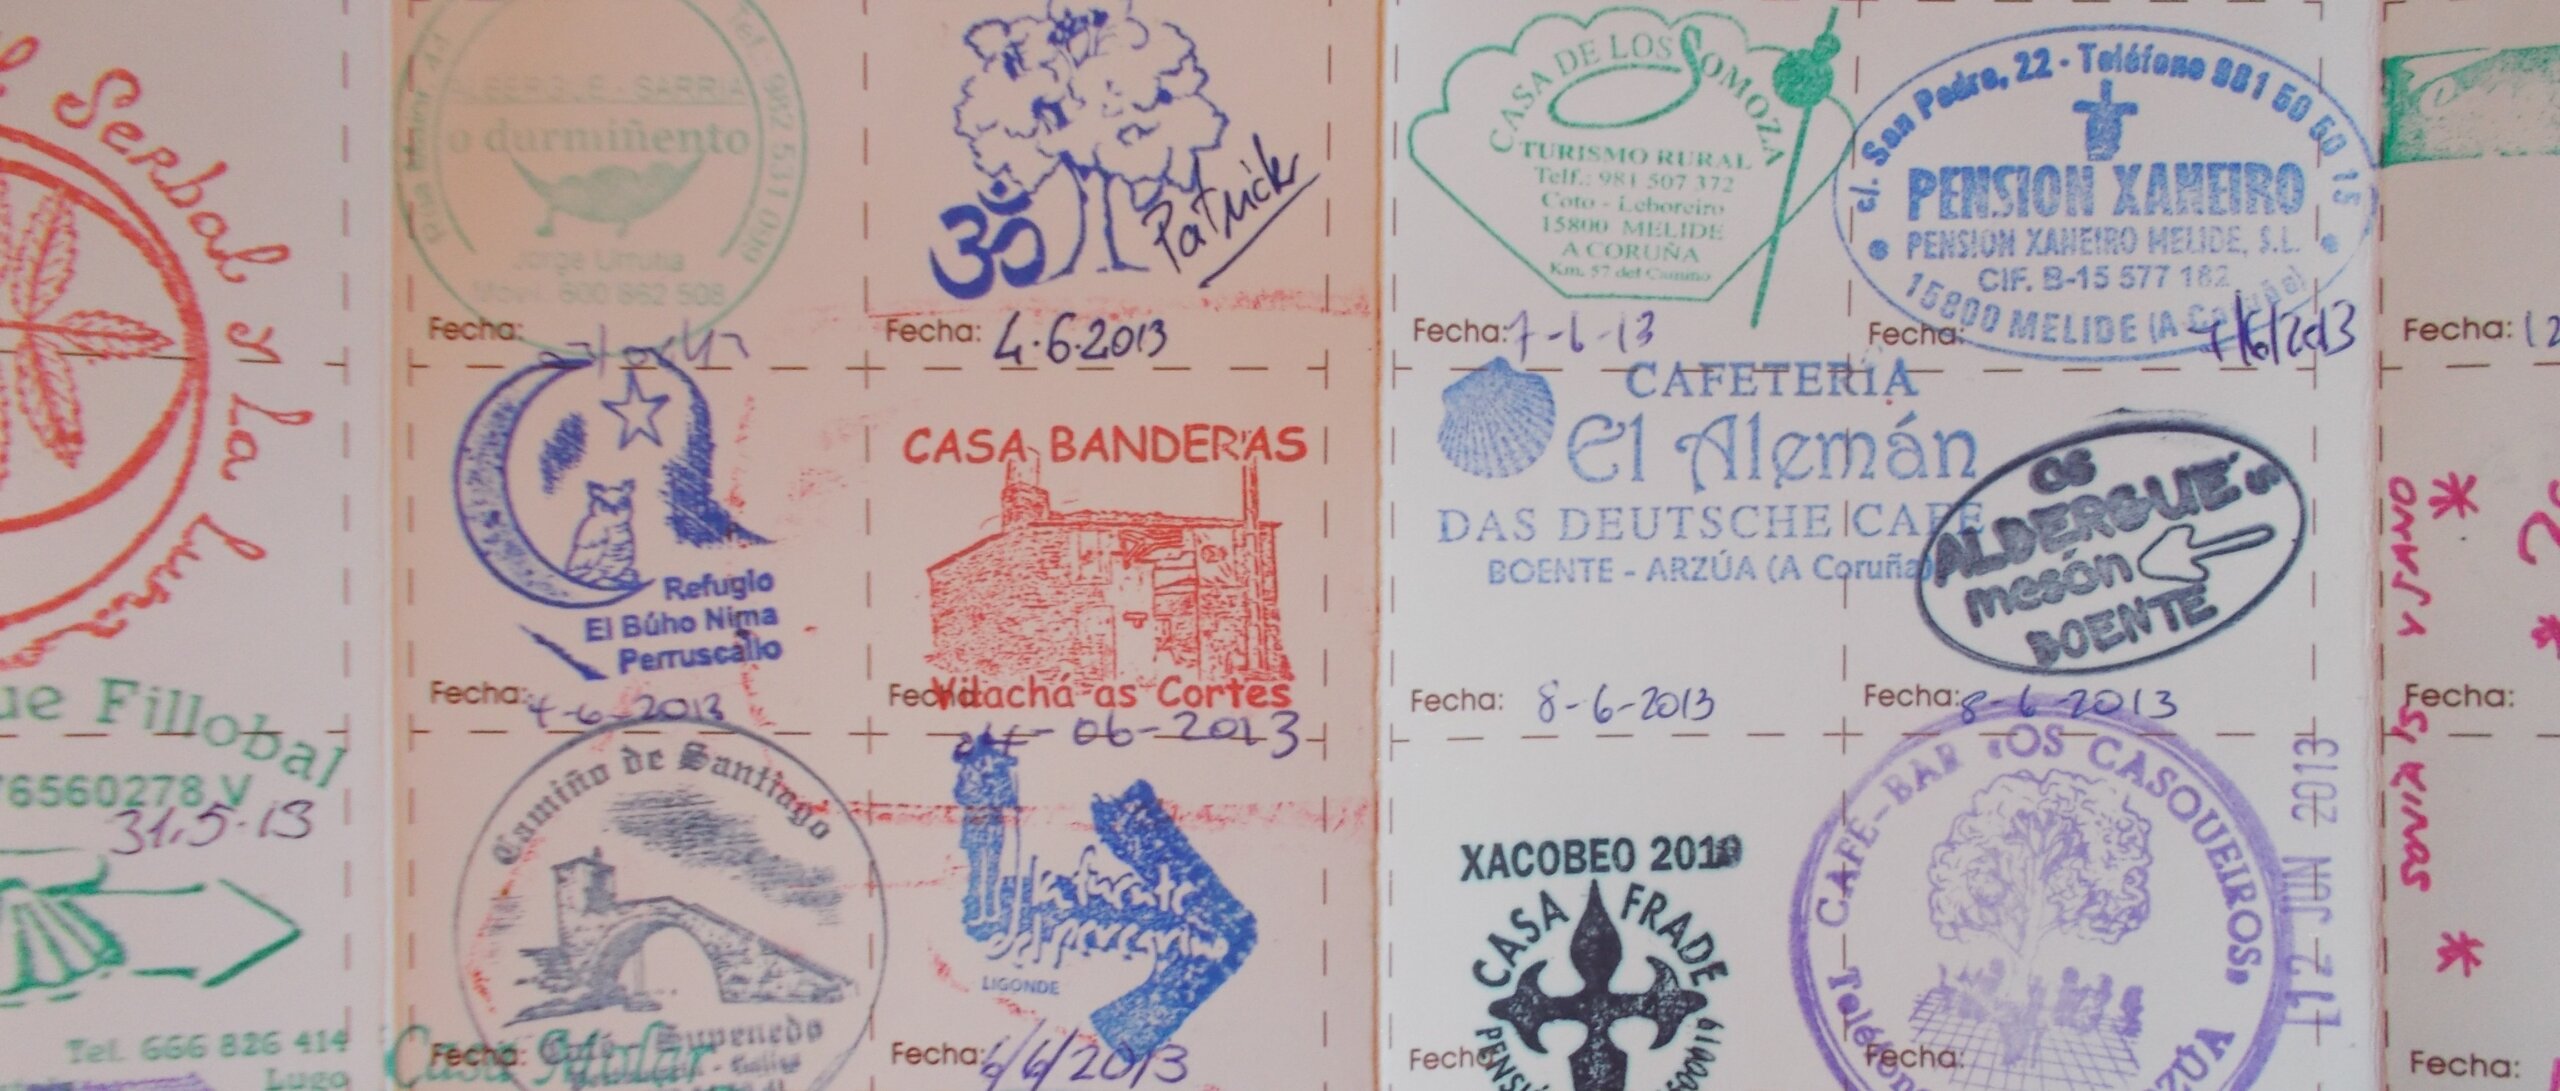 Photo of stamps, or sellos, from the Camino Francés route of the Camino de Santiago in Spain